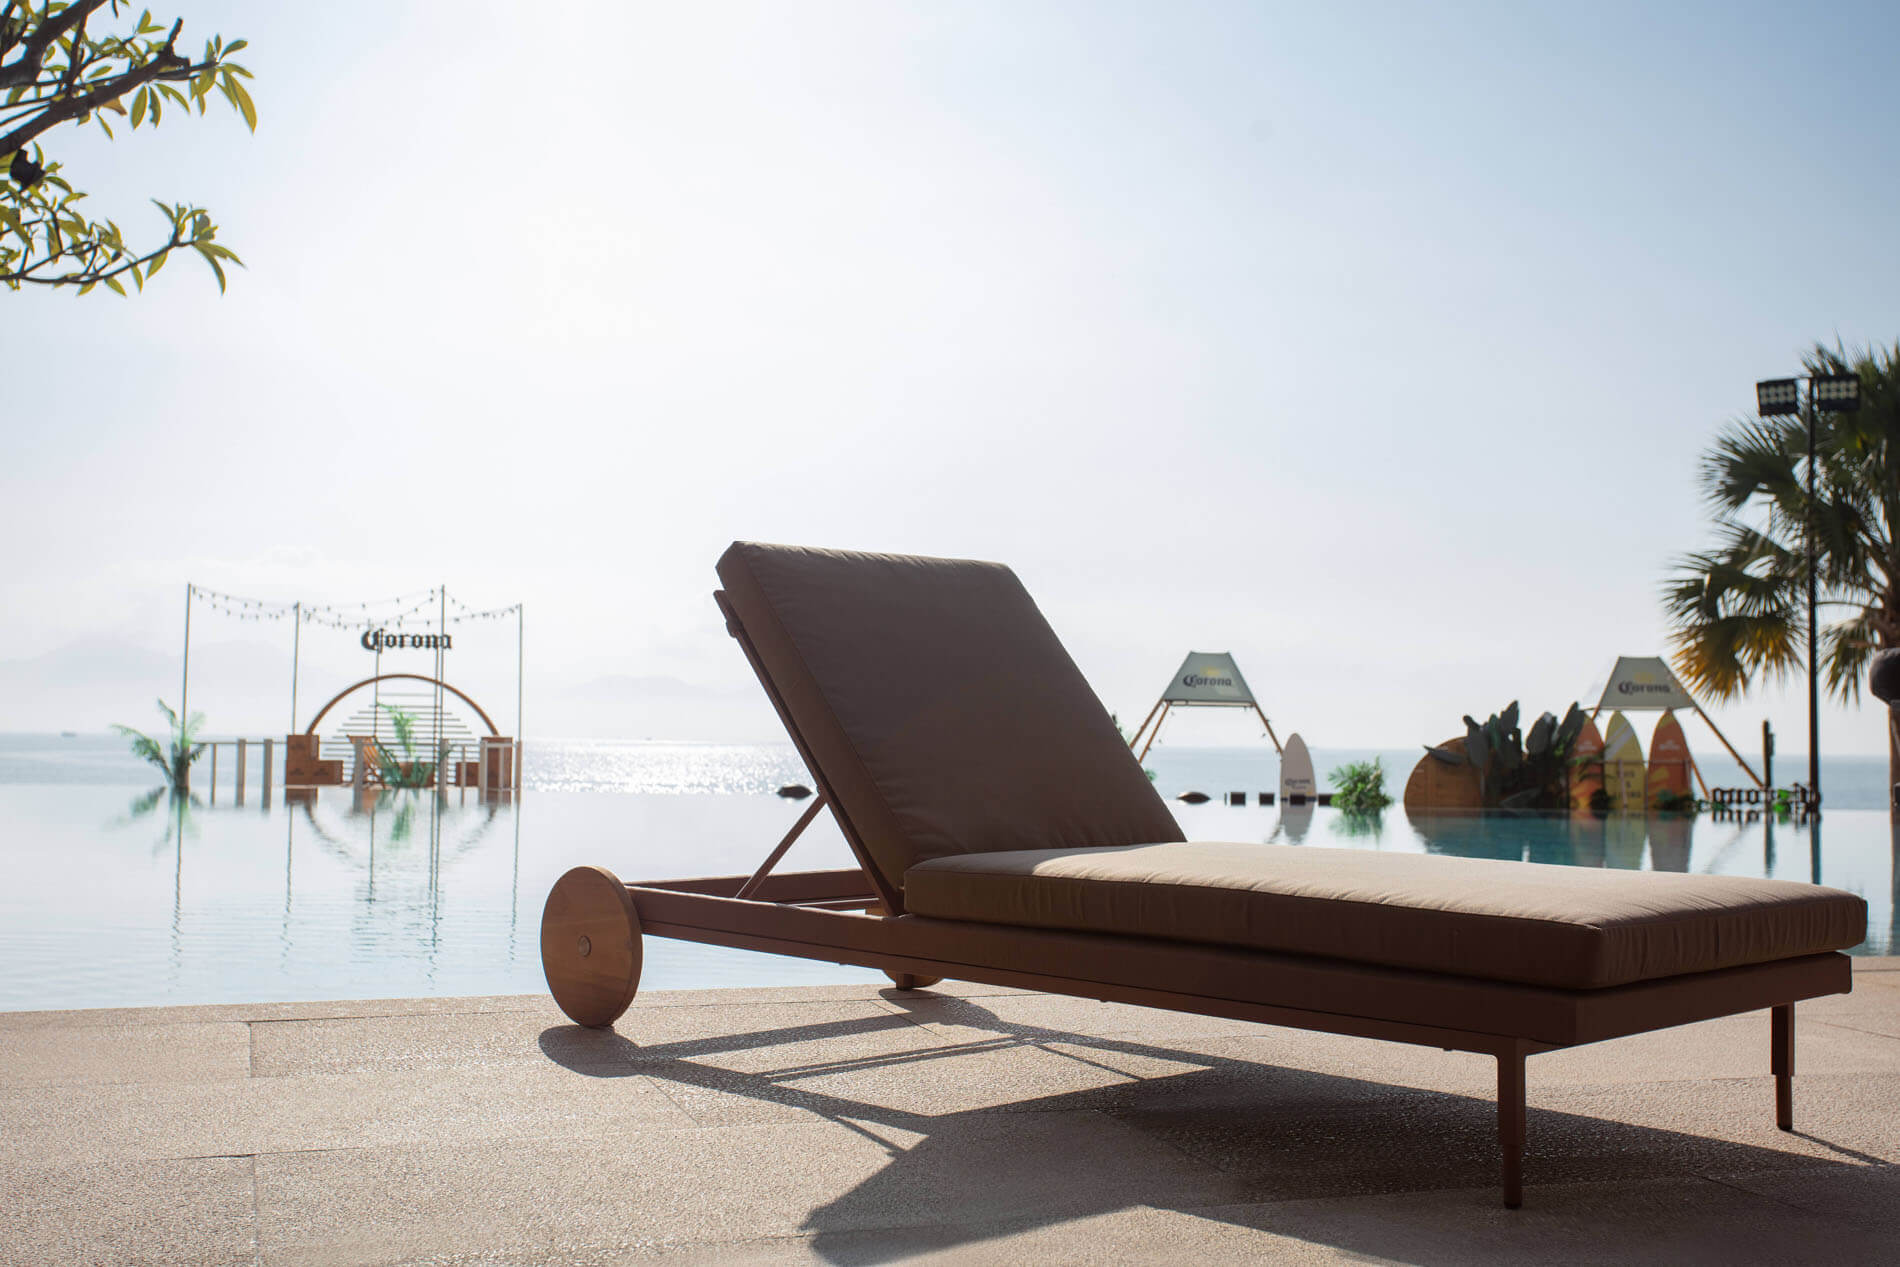 Poggesi Eden Lounger - The epitome of ultimate comfort and style for your leisure moments.